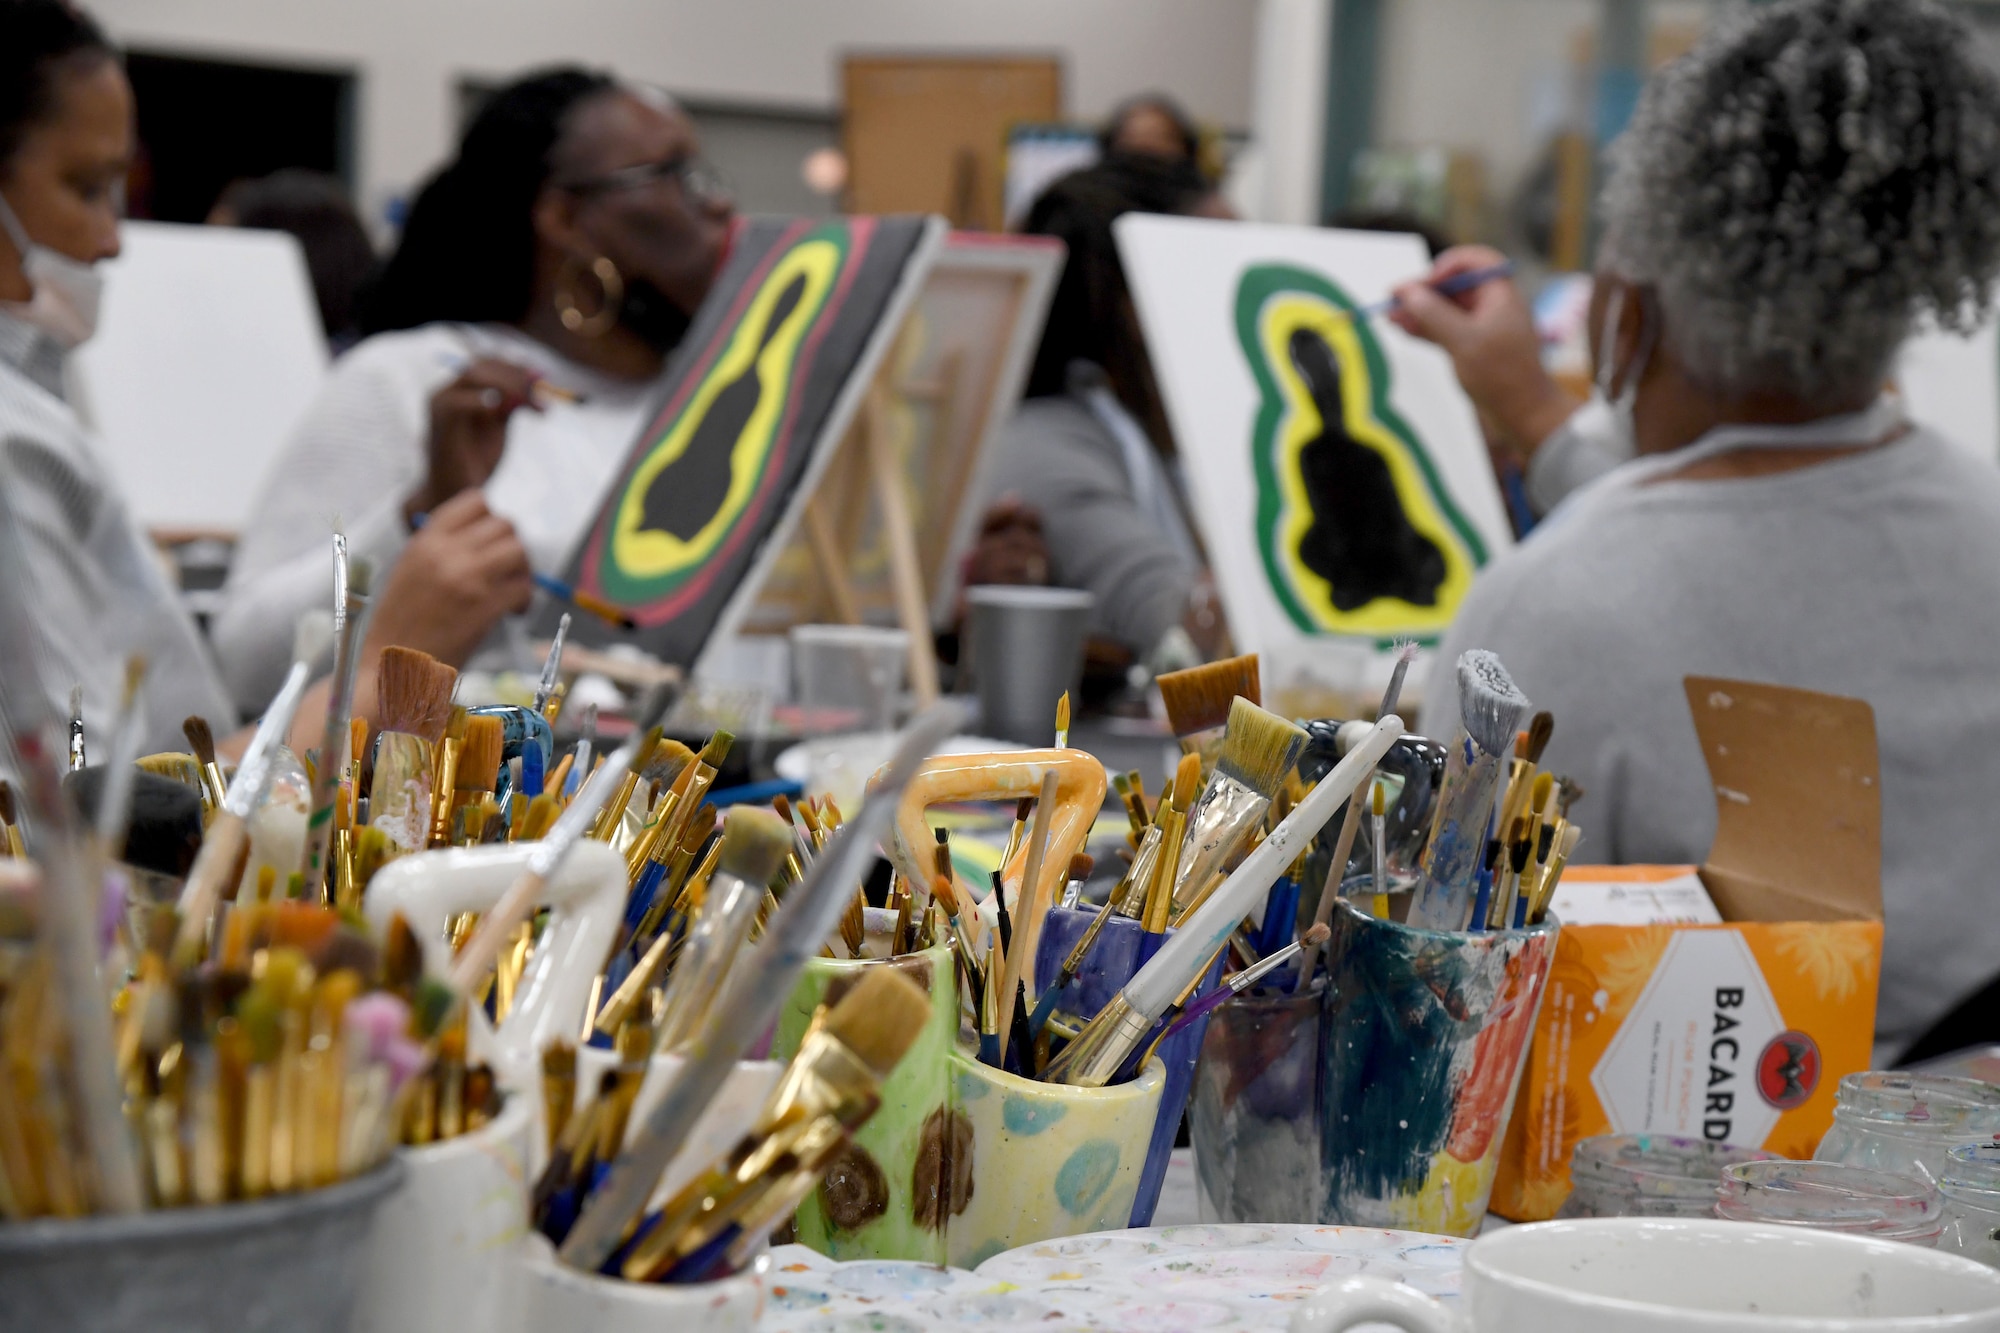 Keesler personnel participate in a paint and sip event inside the Keesler Arts and Crafts Center at Keesler Air Force Base, Mississippi, Feb. 18, 2022. The African-American Heritage and Black History Month Committees hosted the event in celebration of Black History Month, which is celebrated throughout February. (U.S. Air Force photo by Kemberly Groue)